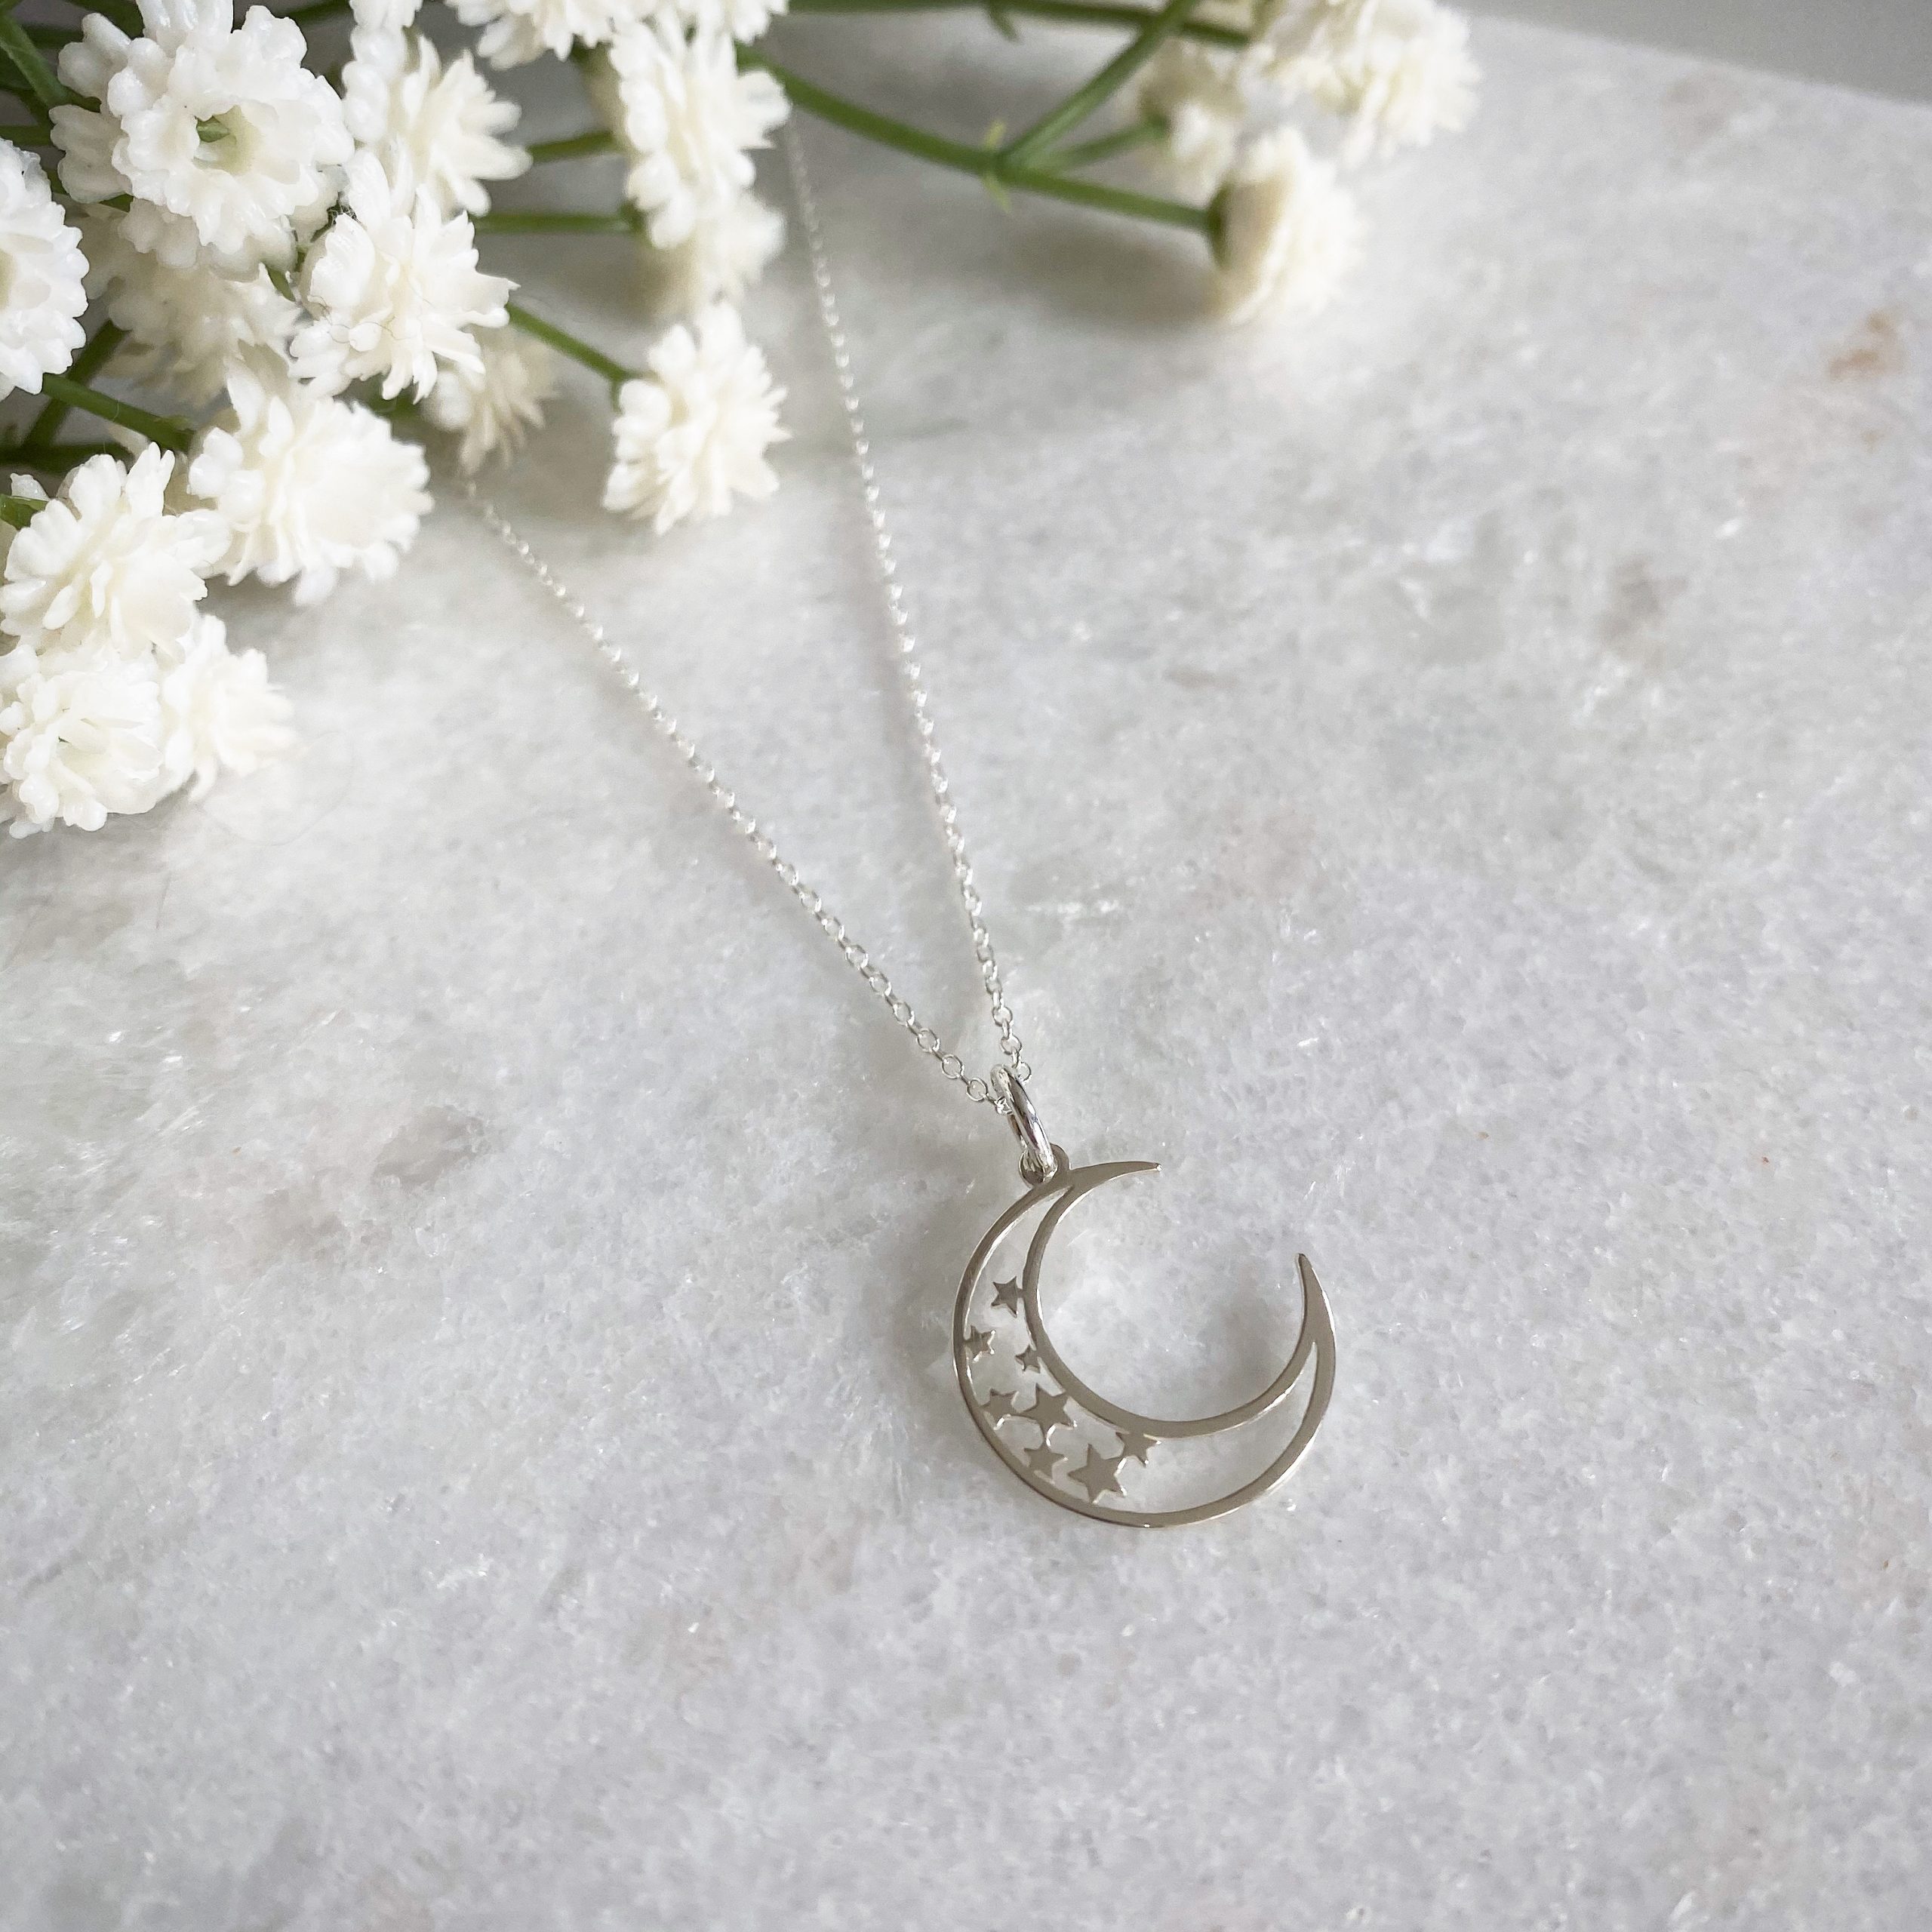 Large Personalised Birthstone Confetti Moon Necklace | Posh Totty Designs